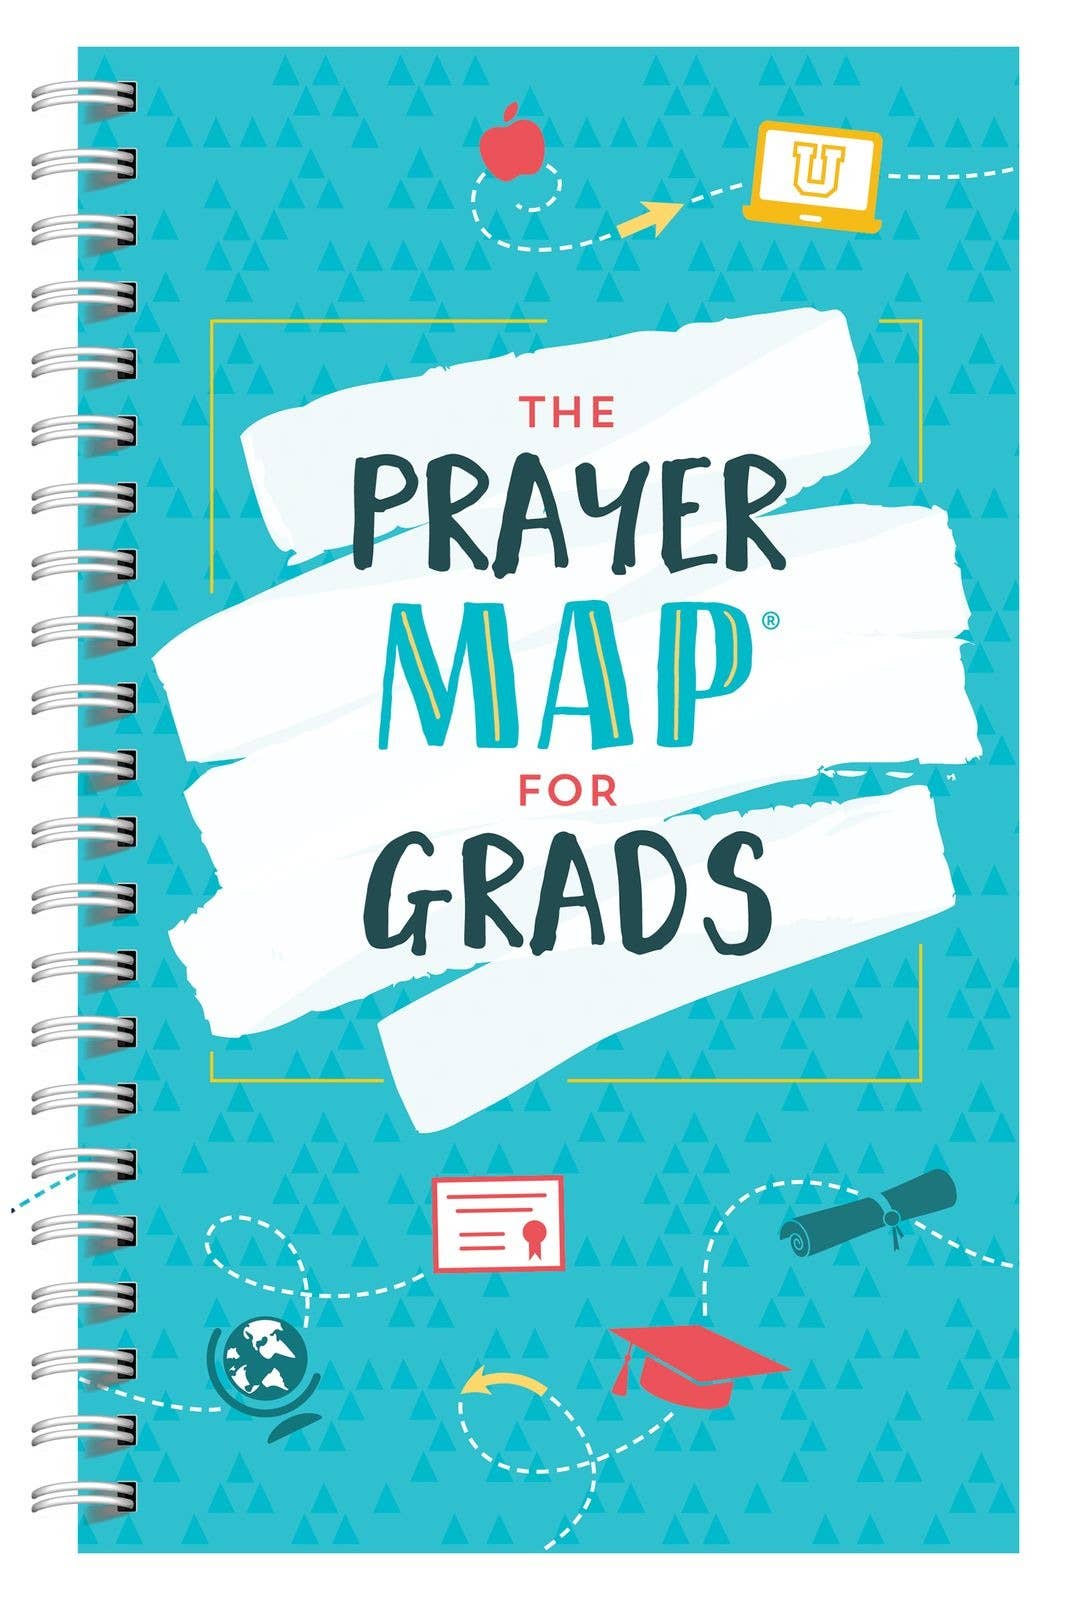 The Prayer Map® for Grads